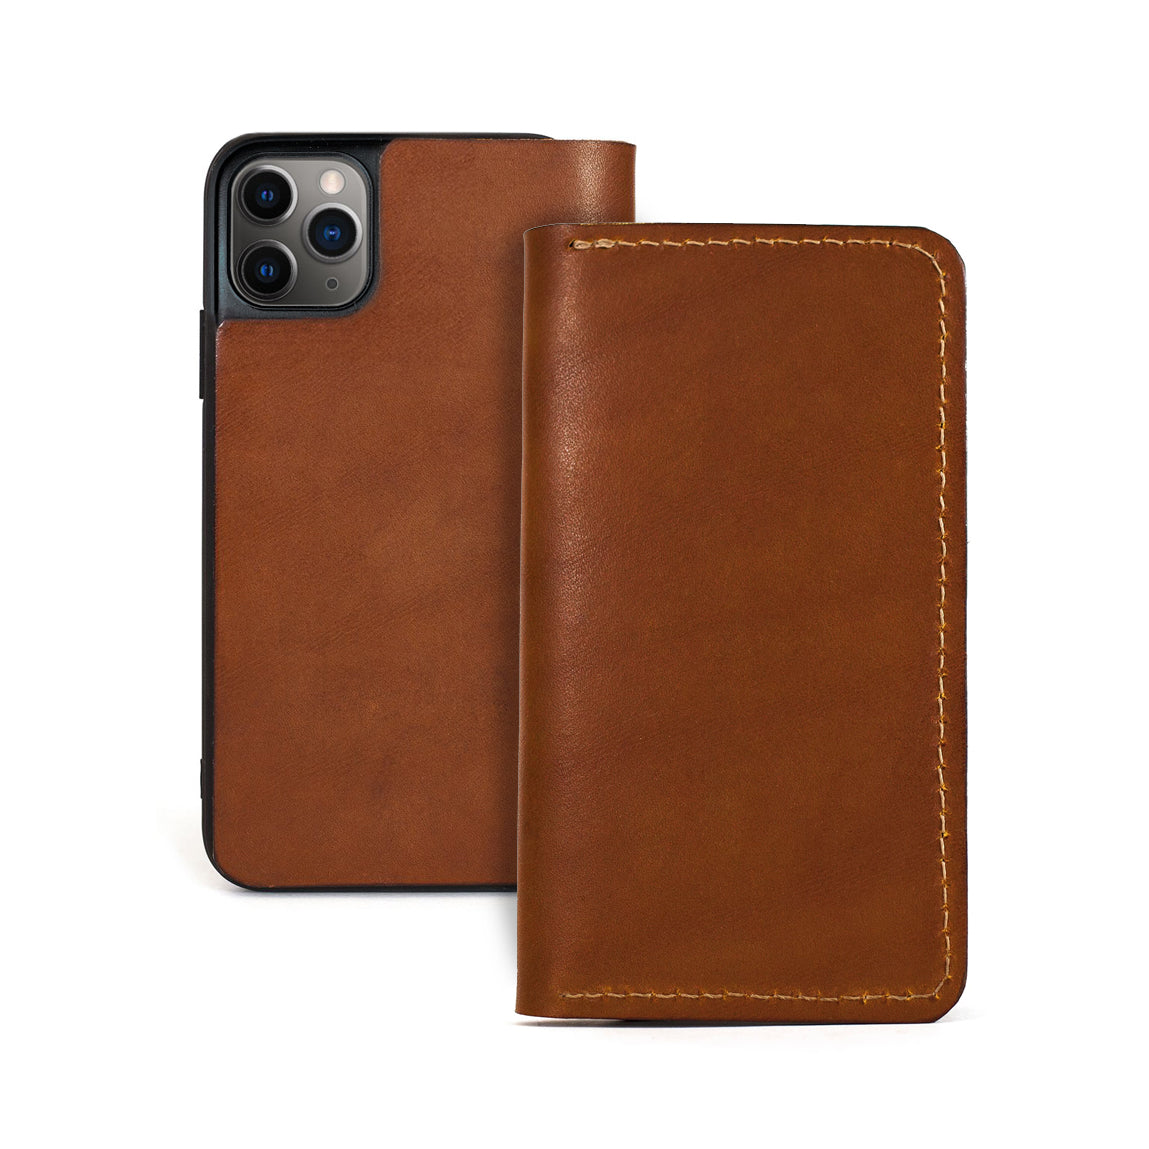 theGOODbook iPhone Wallet - Saddle Tan - Red Clouds Collective - Made in  the USA